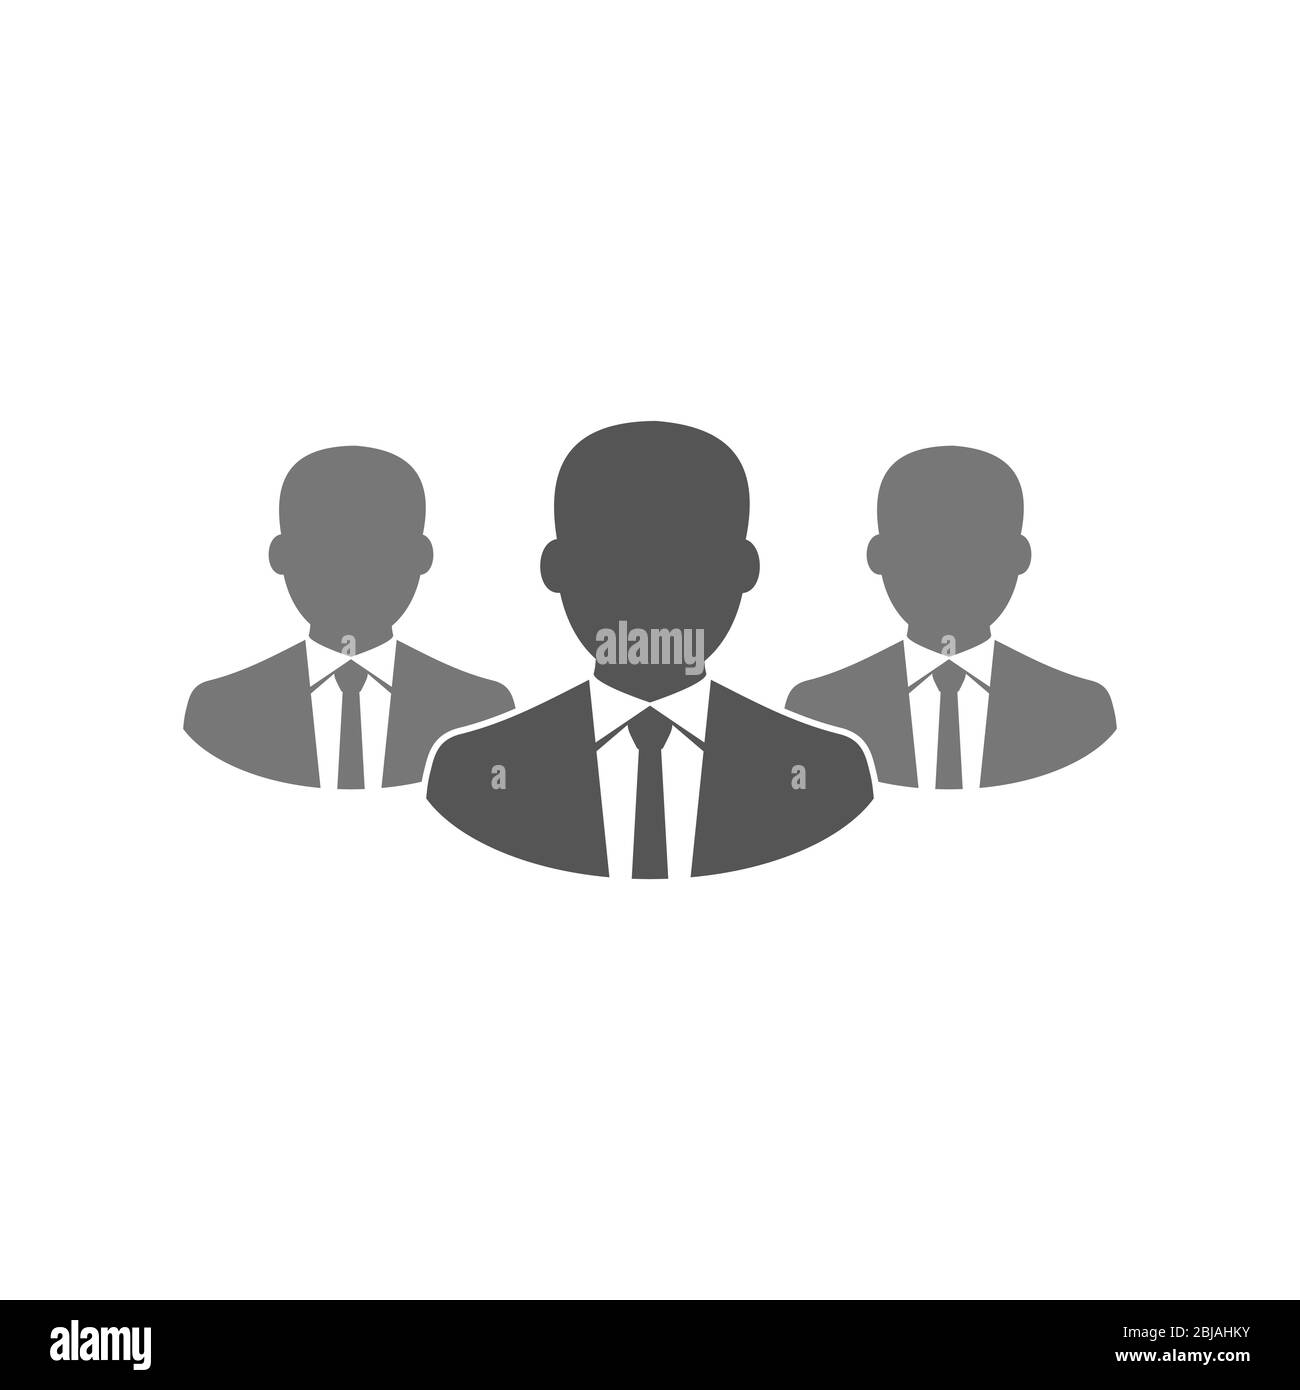 Simple, flat businessman team icon. Silhouette icon. Isolated on white. EPS 10. Stock Vector